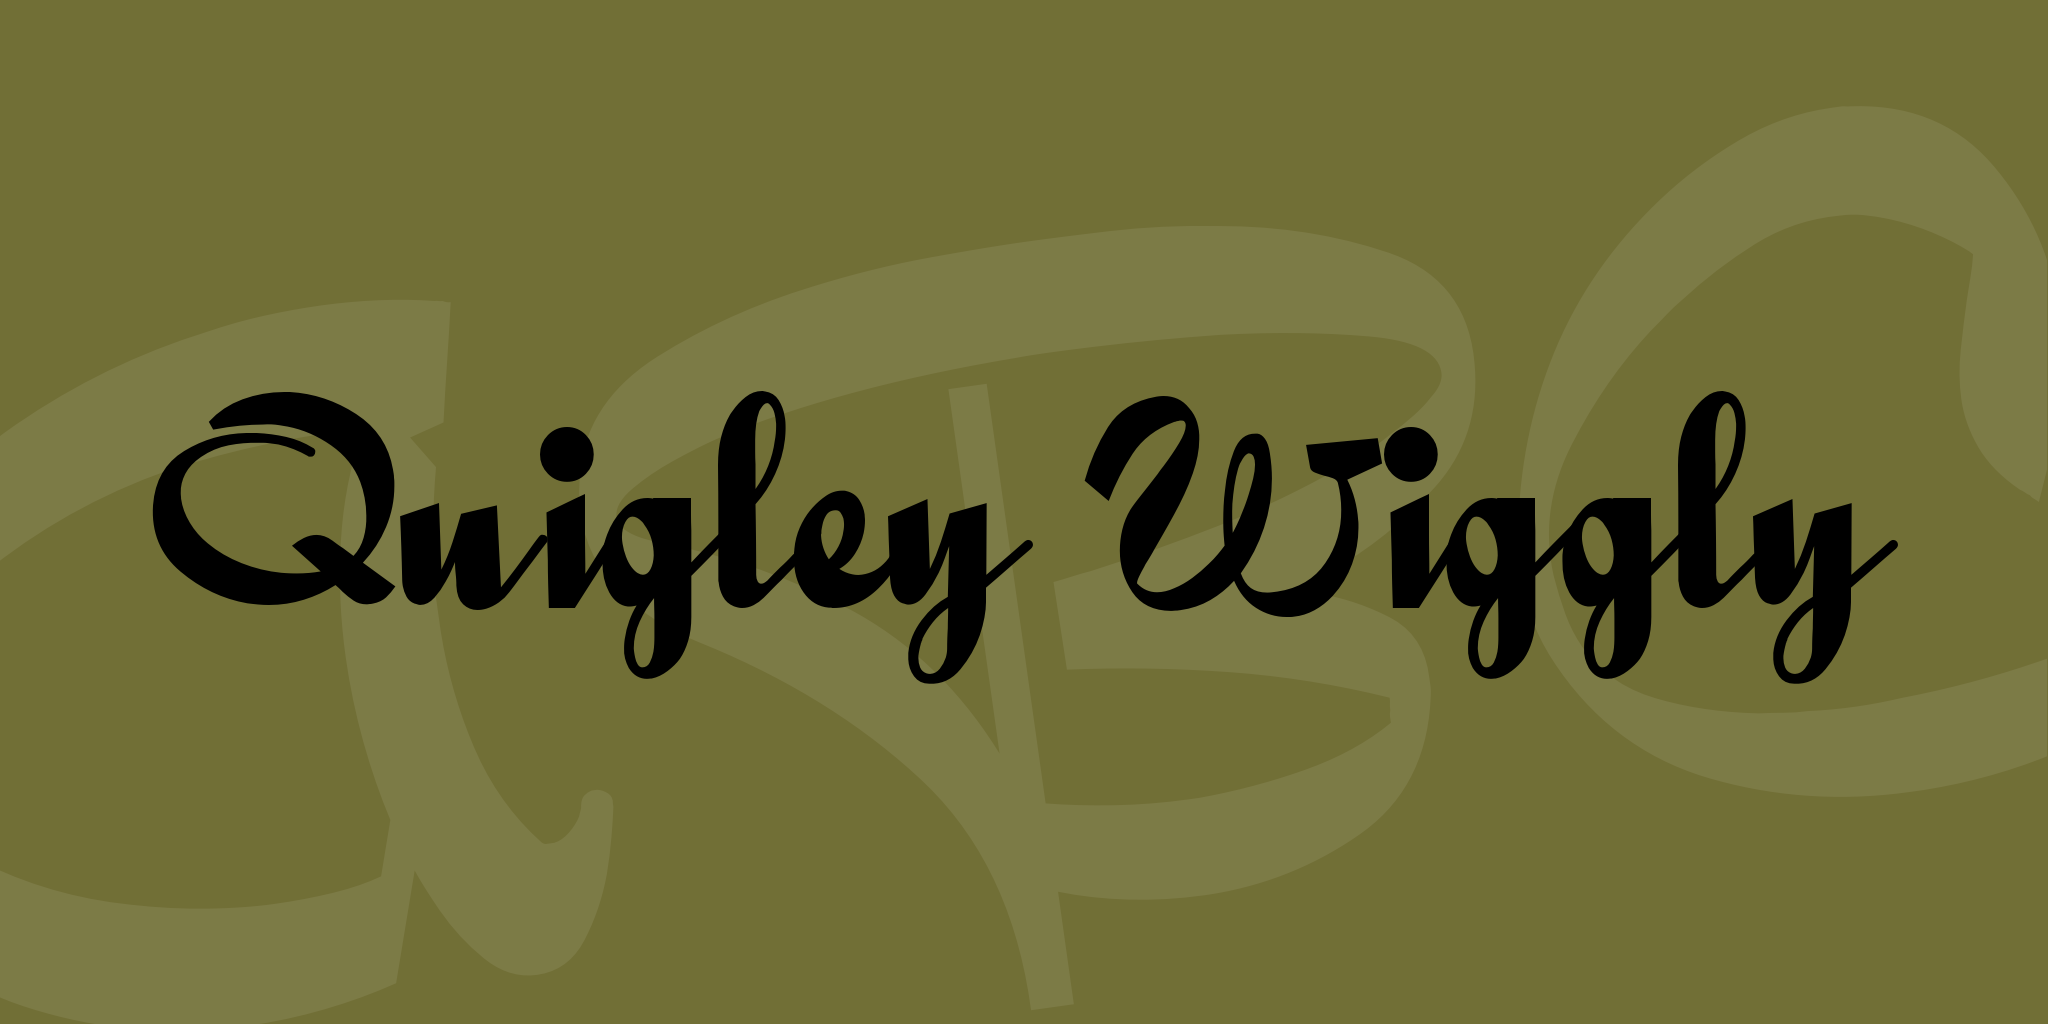 Quigley Wiggly